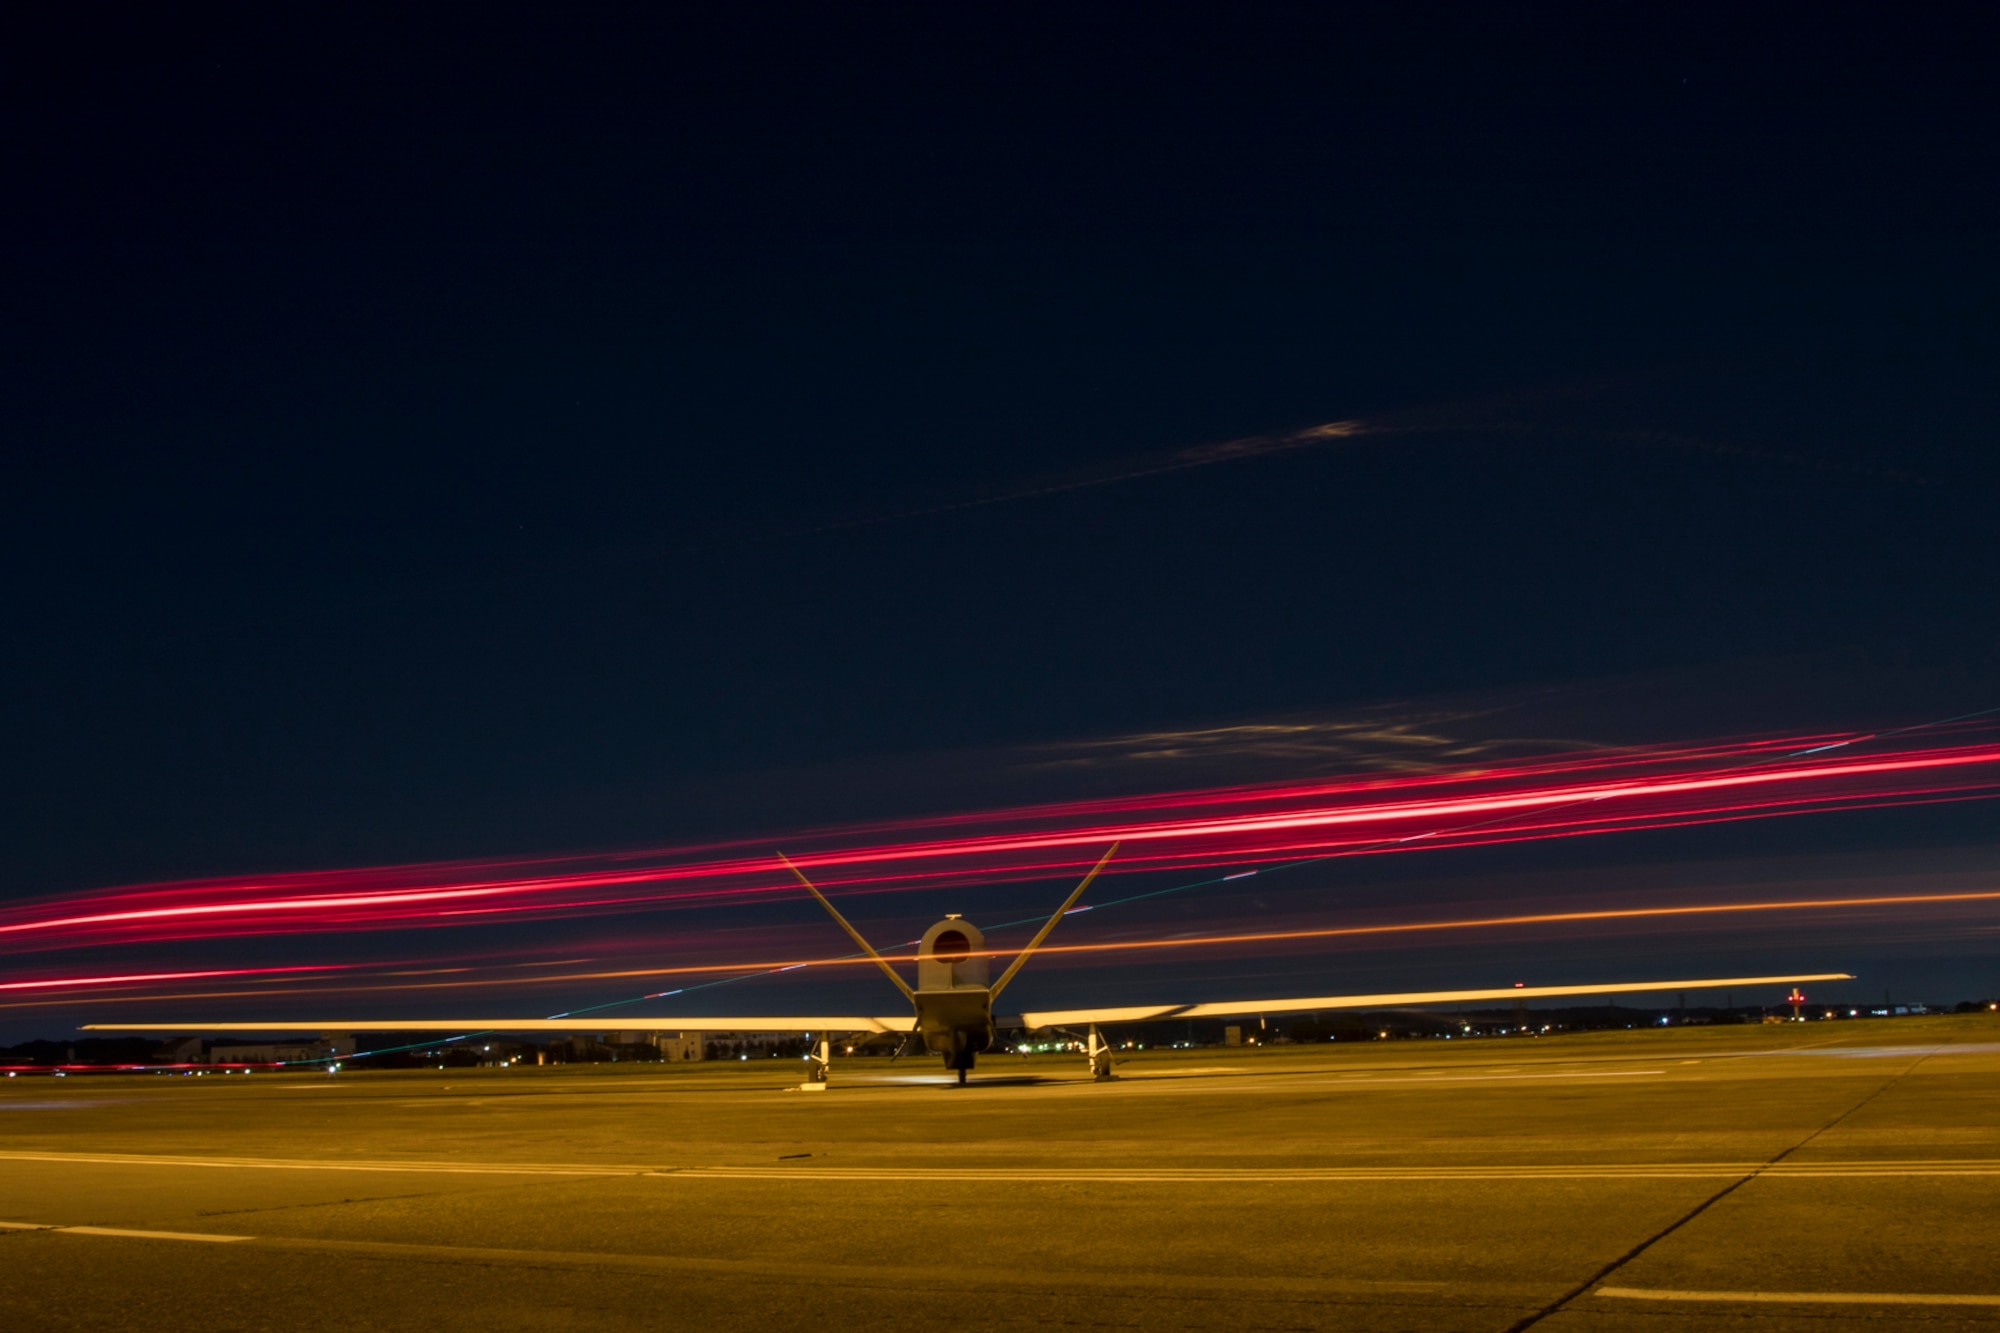 An RQ-4 Global Hawk’s engine warms up while planes take off and support vehicles pass by May 5, 2017, at Yokota Air Base, Japan. The Global Hawk is a high-altitude, long-endurance, remotely piloted and unarmed, aerial reconnaissance system. (U.S. Air Force photo by Airman 1st Class Donald Hudson)